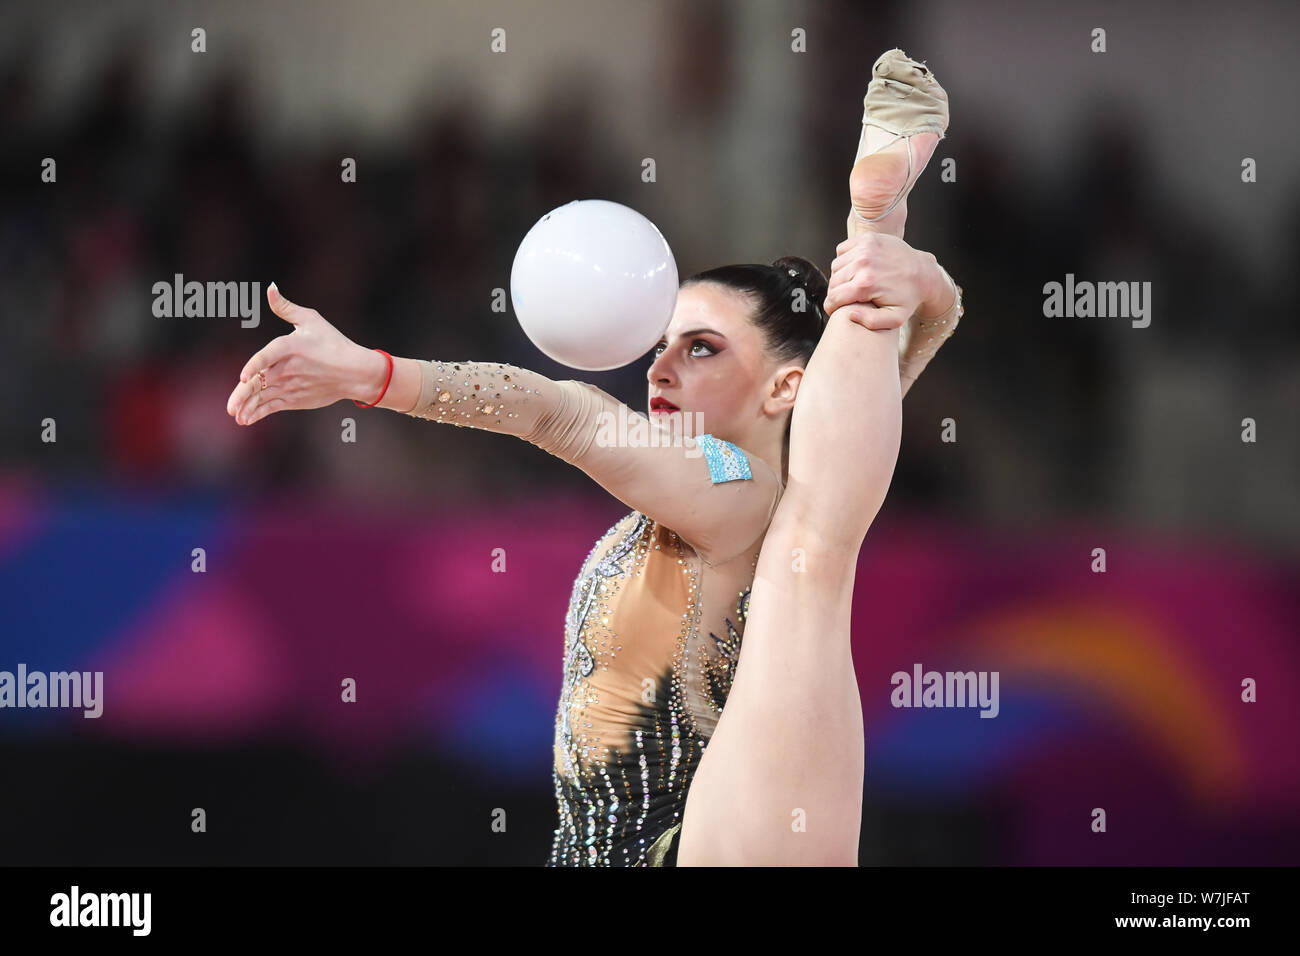 Lima, Peru. 4th Aug, 2019. CELESTE D'ARCANGELO from Argentina bounces the ball off her arm while standing holding her foot over her head during the competition held in the Polideportivo Villa El Salvador. Credit: Amy Sanderson/ZUMA Wire/Alamy Live News Stock Photo